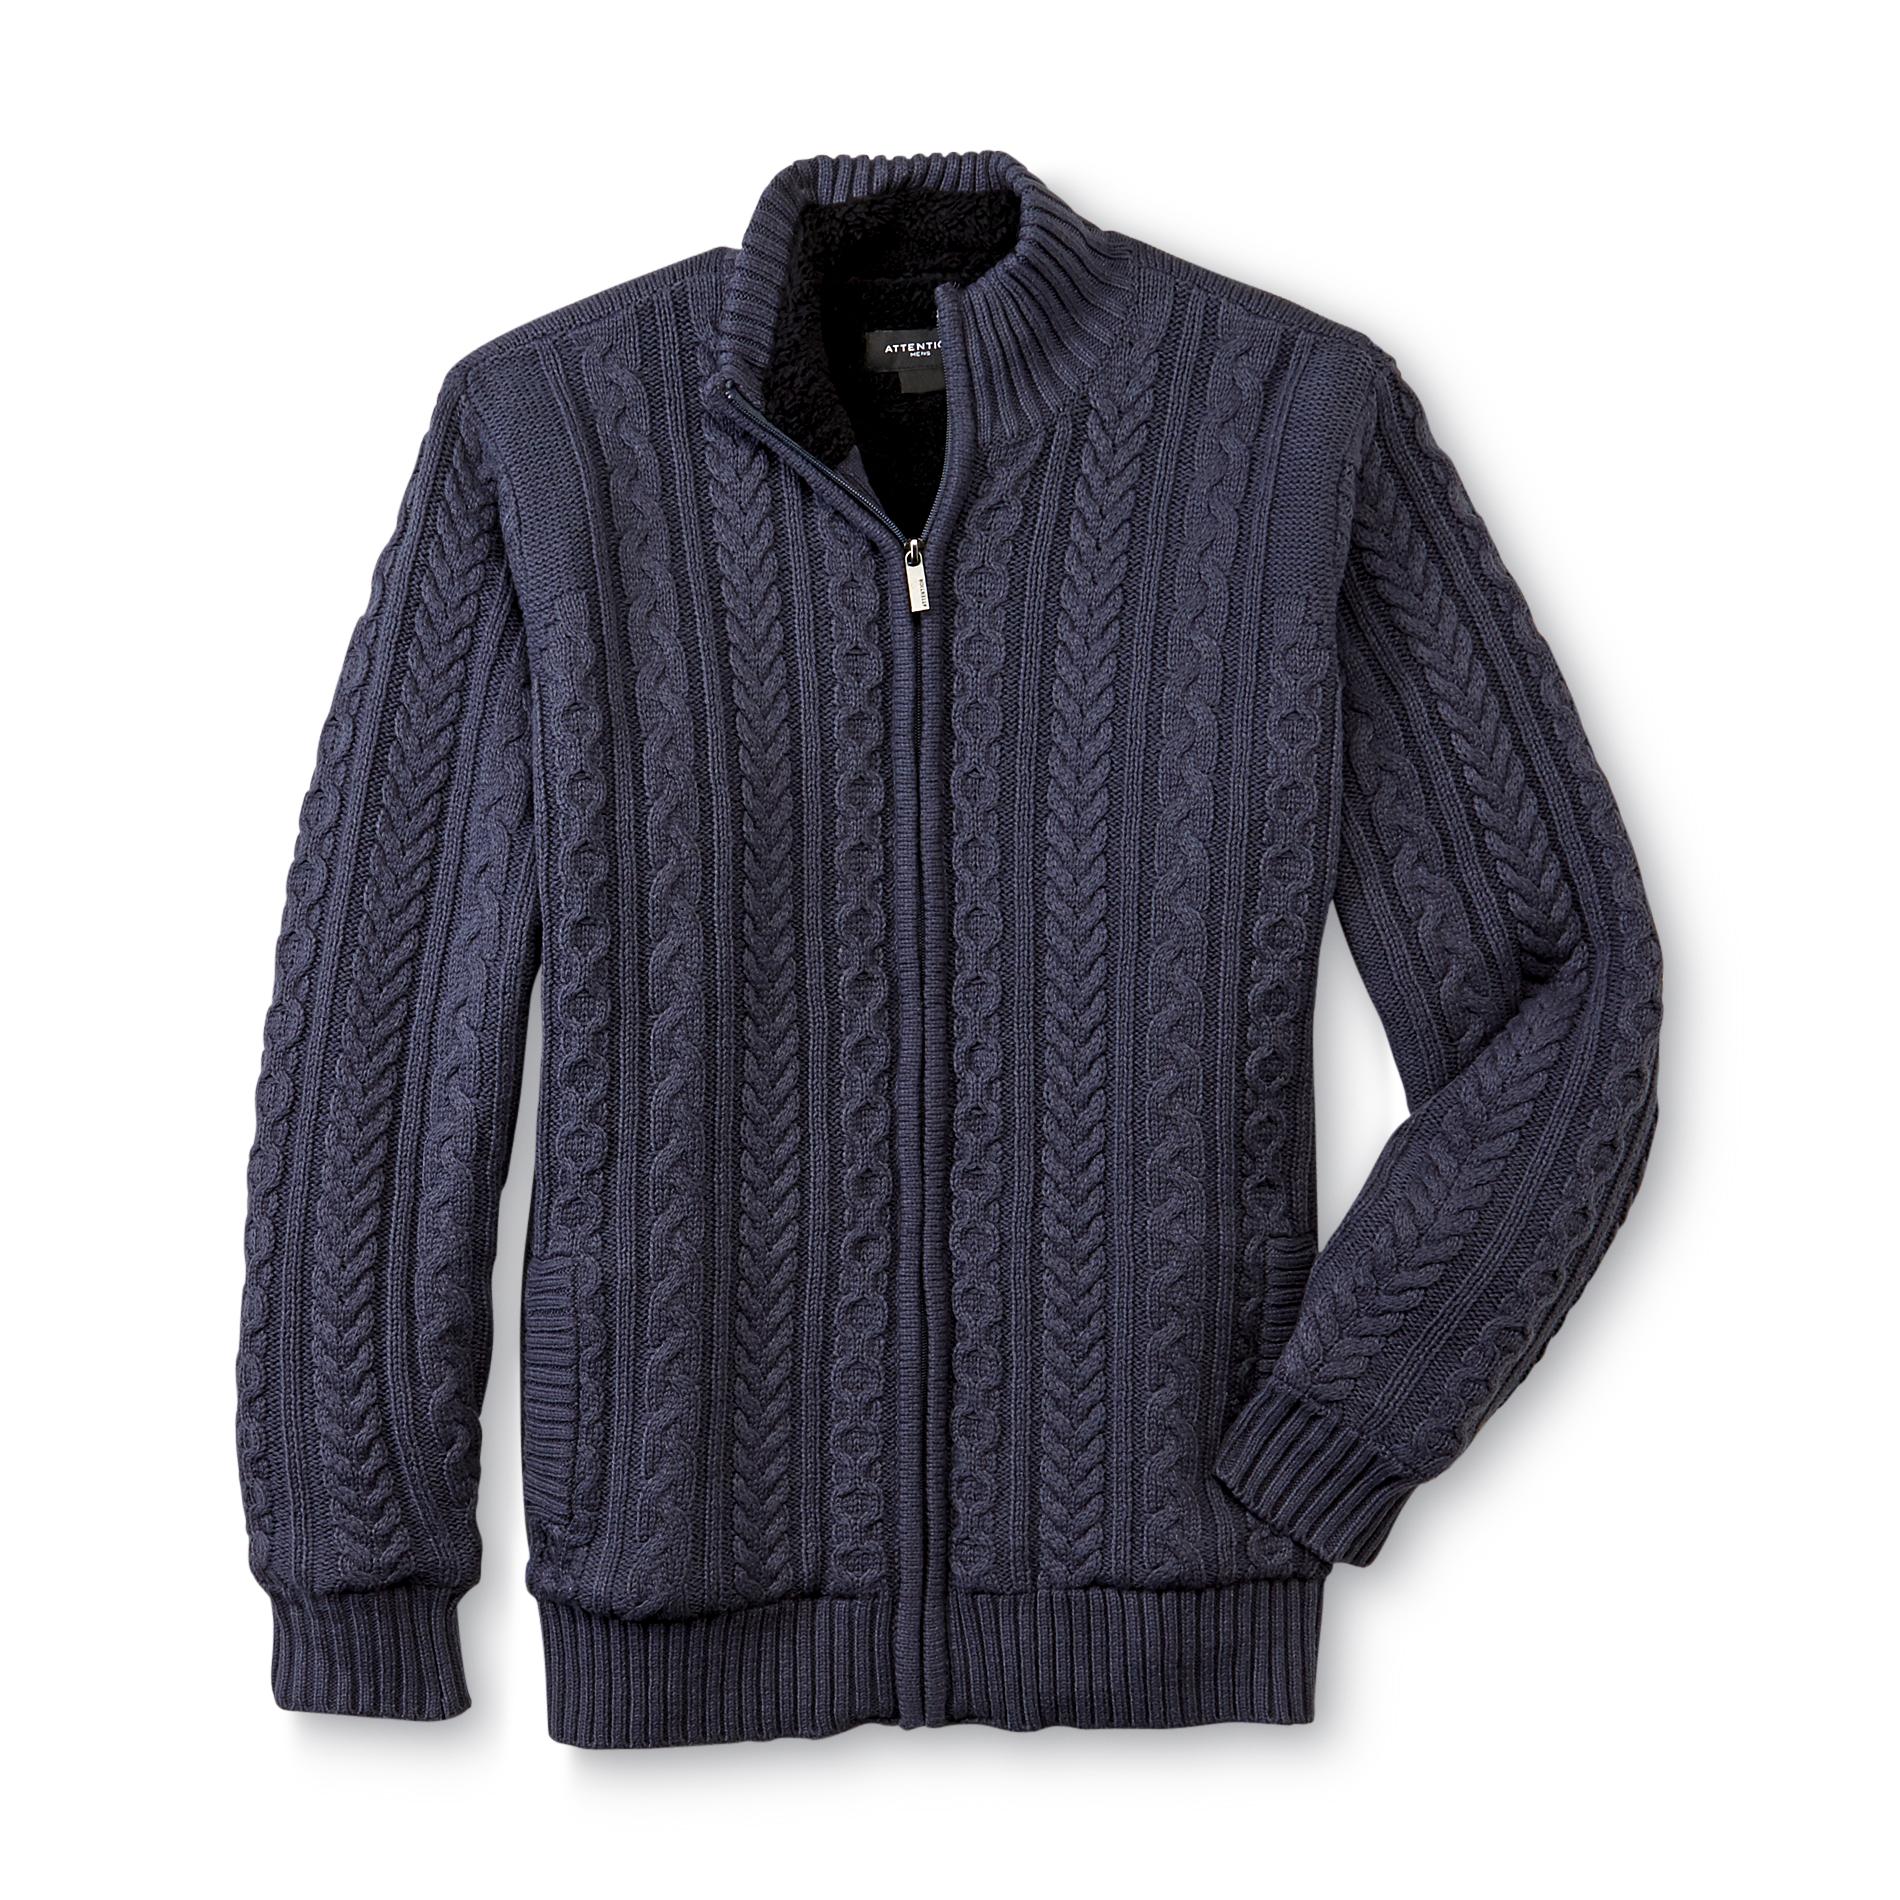 Attention Men's Cable Knit Sweater